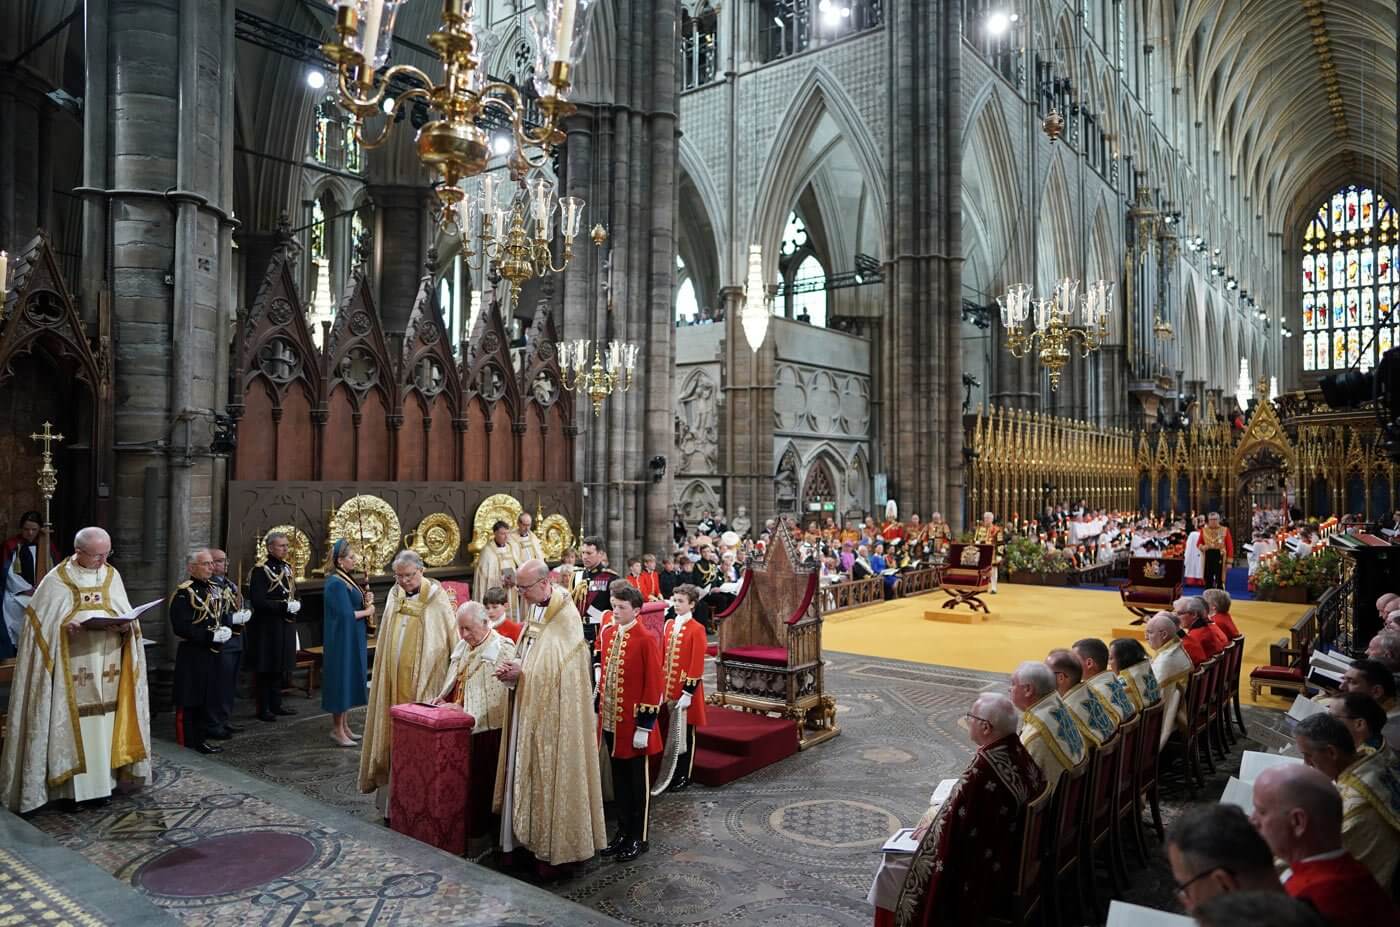 King Charles III sits during the coronation ceremony at Westminster Abbey